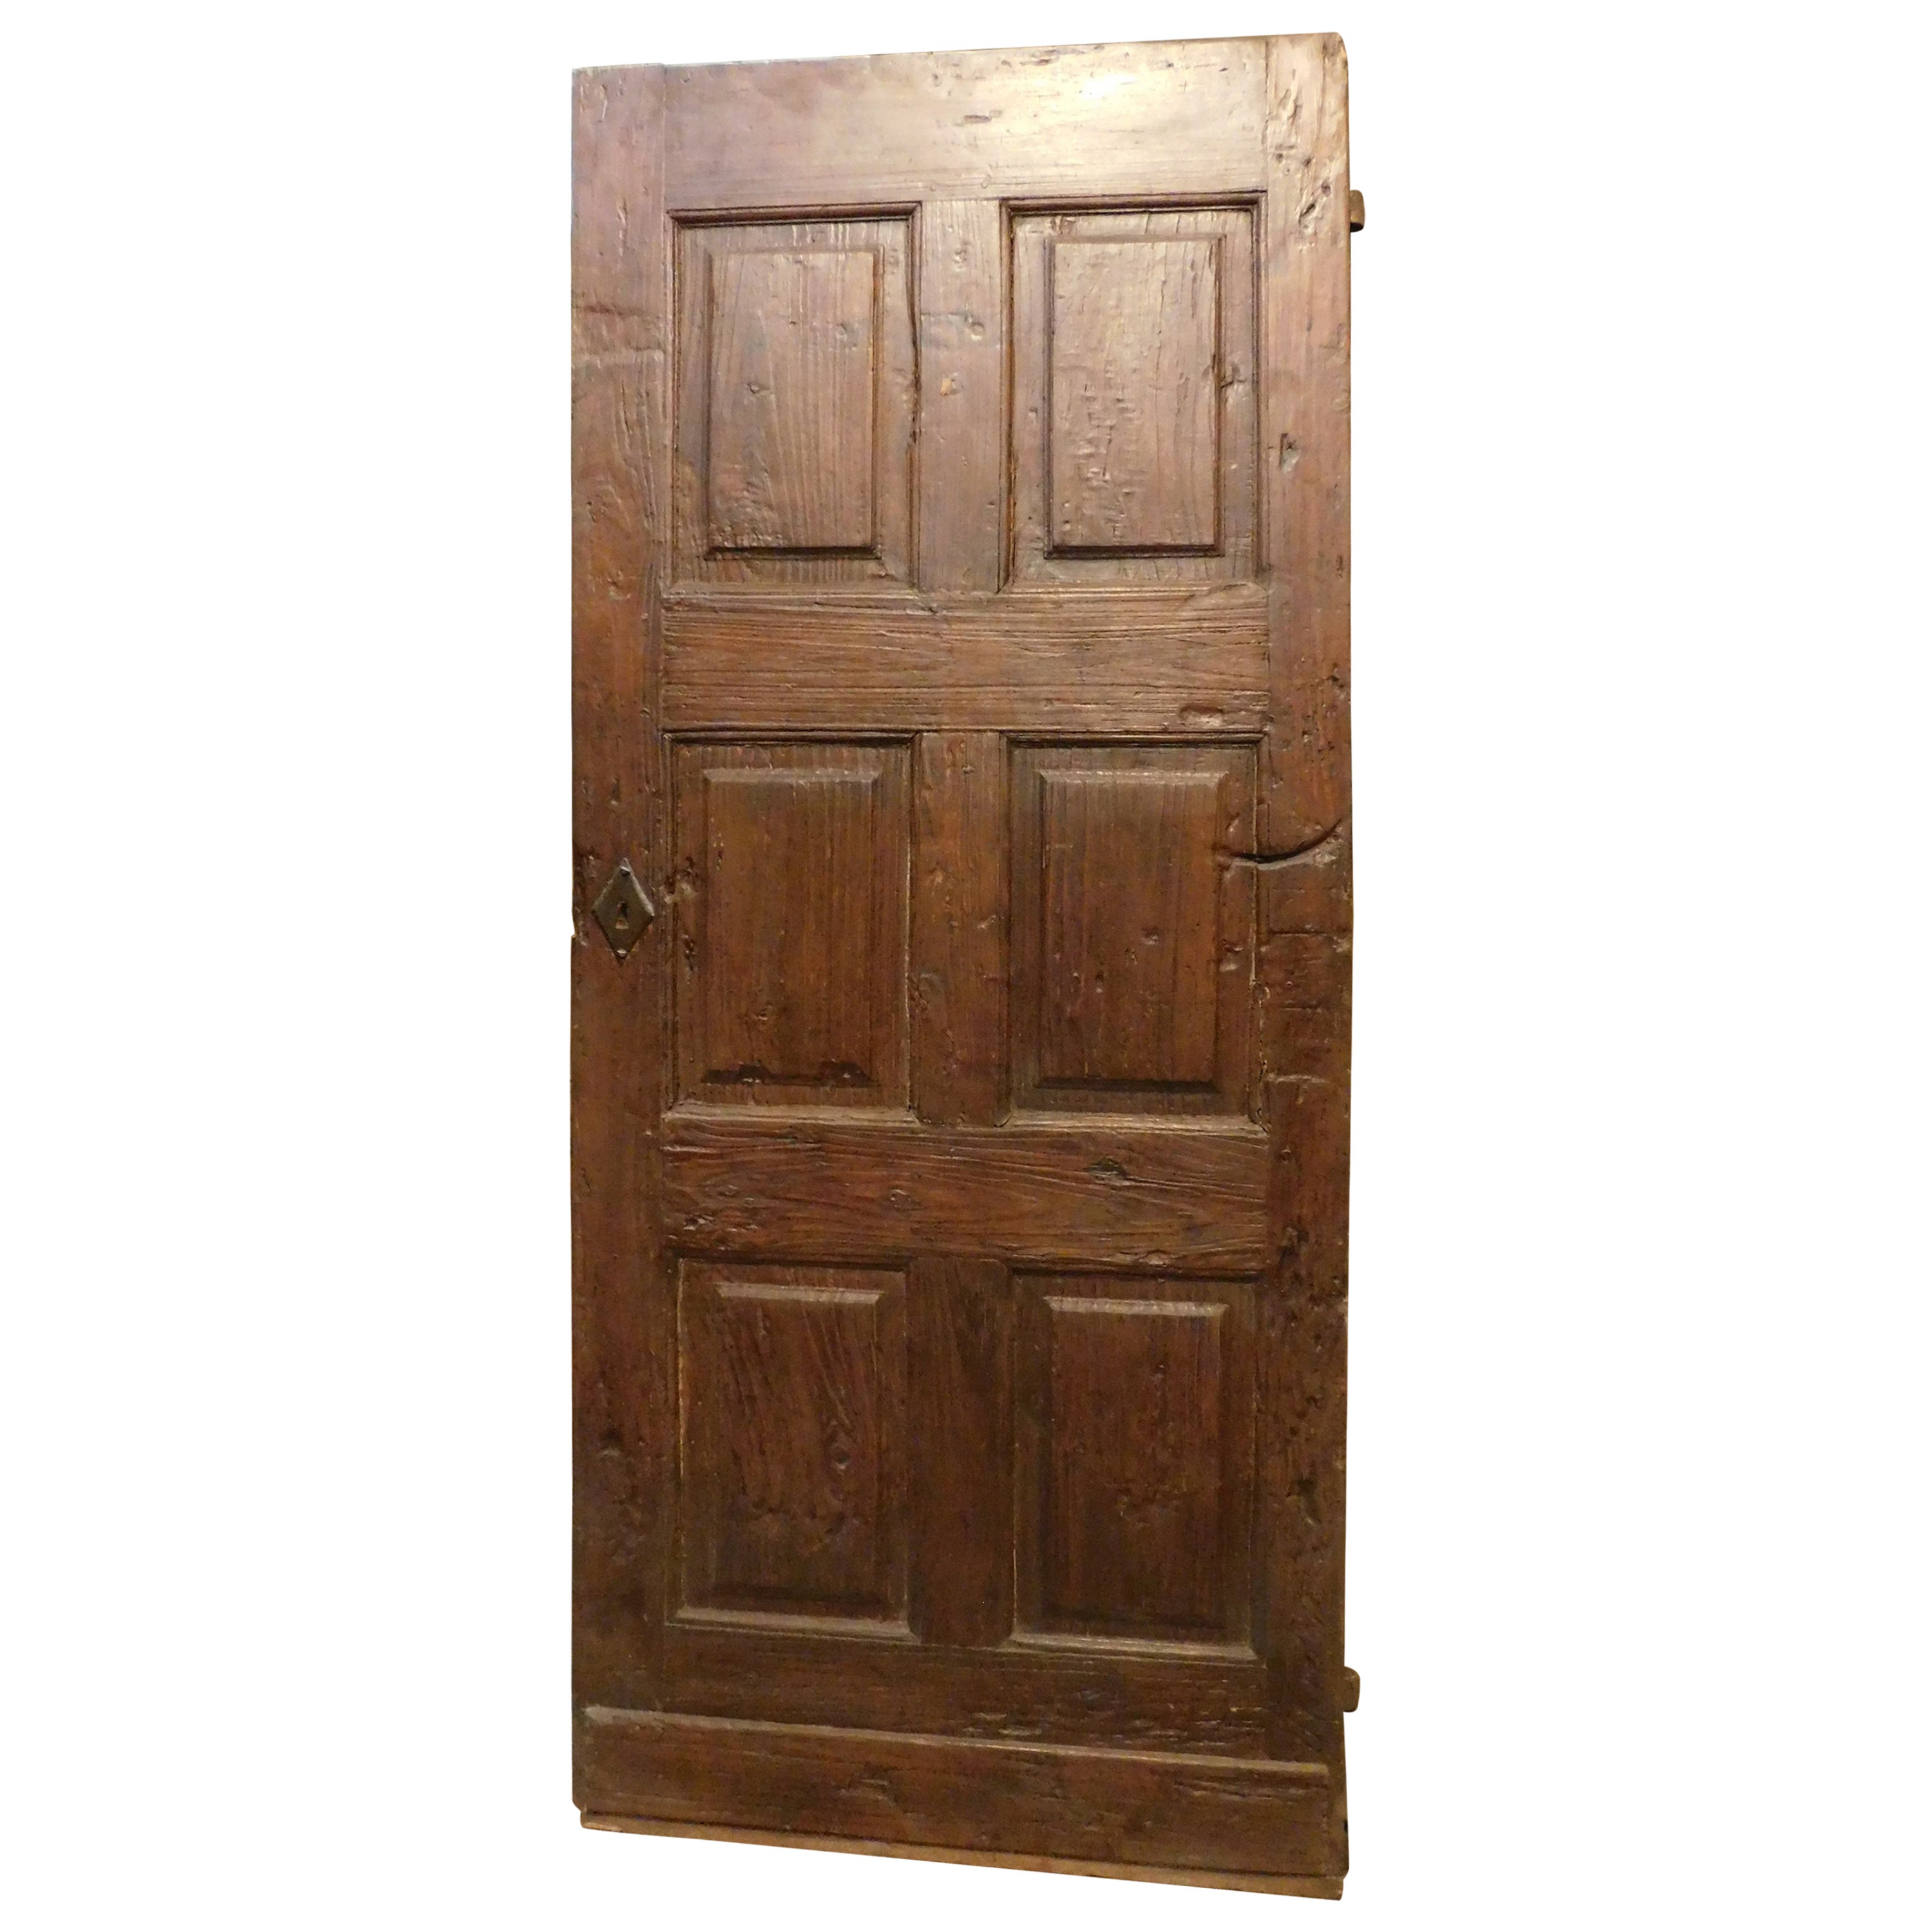 Walnut Entrance Door Carved with Six Panels, 19th Century Italy